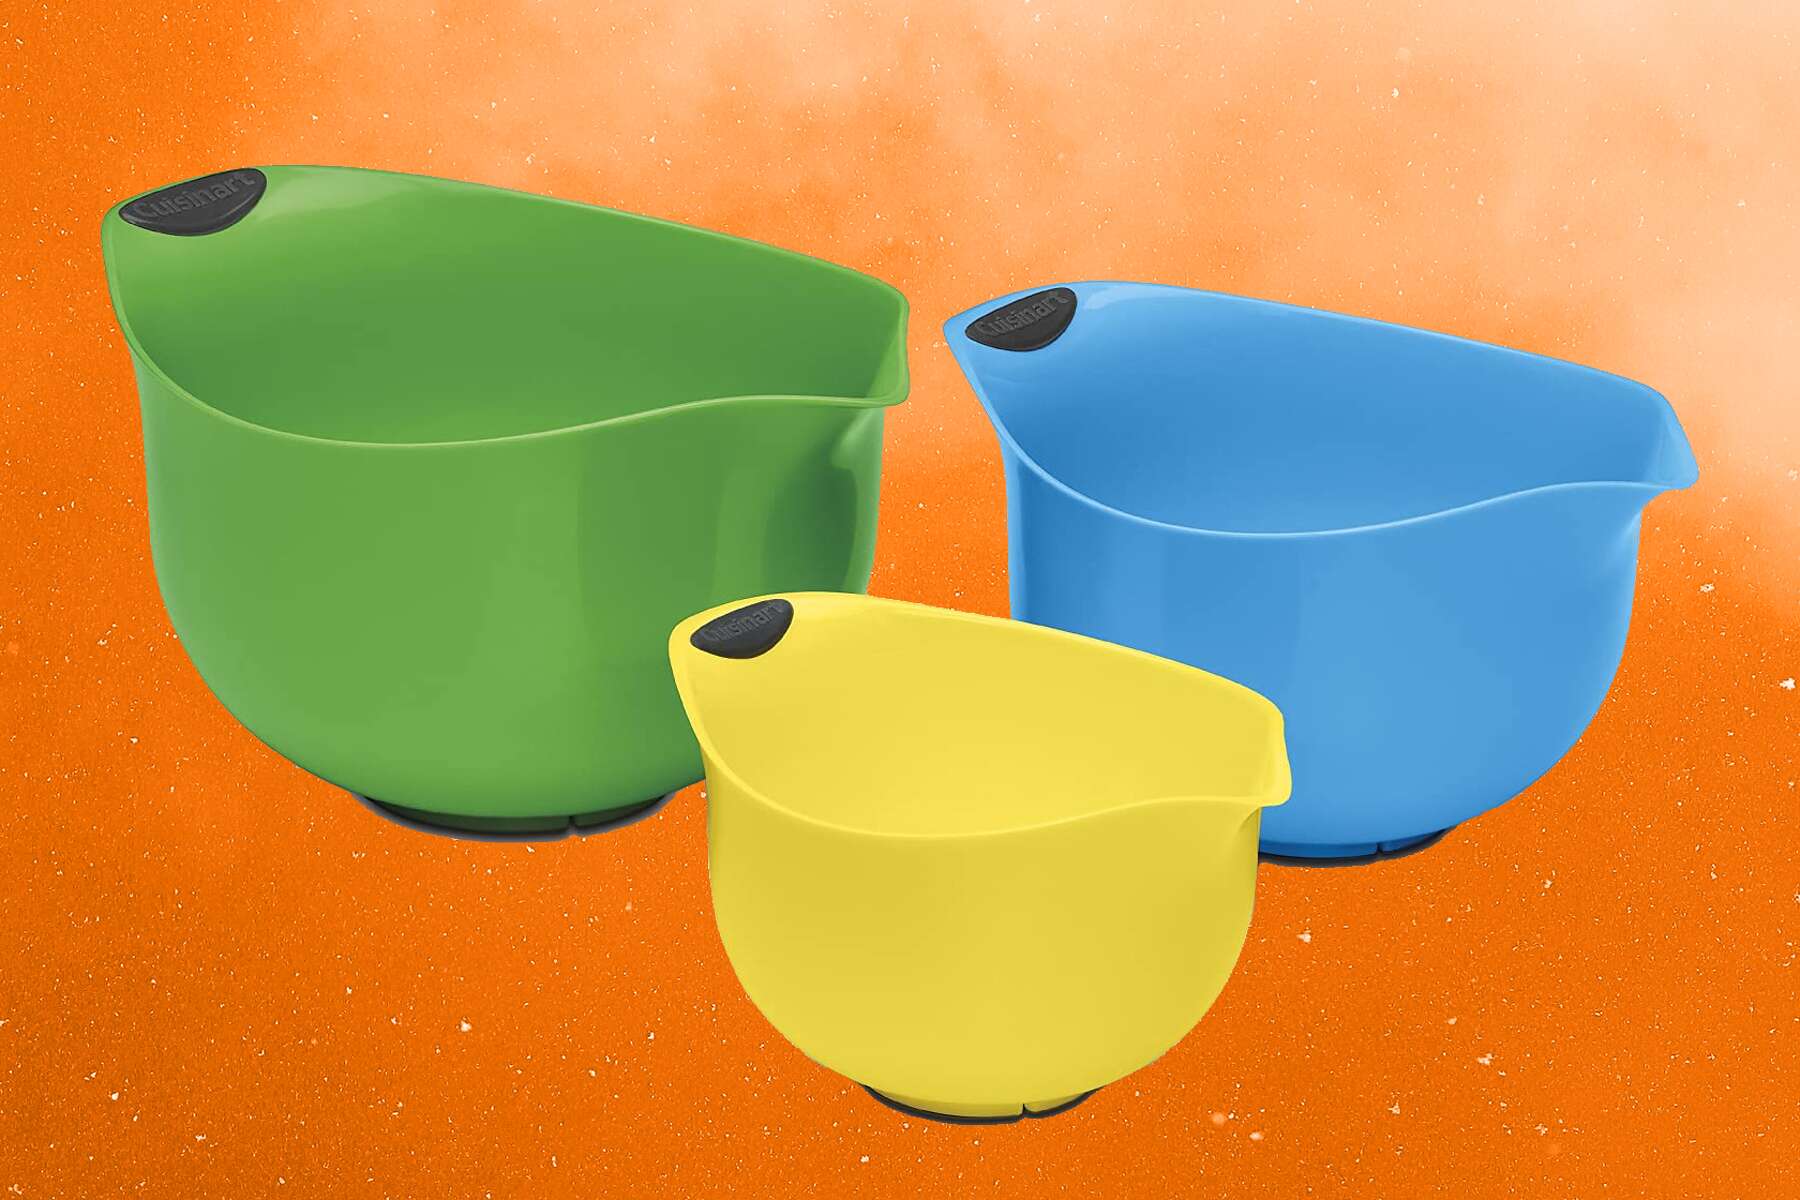 Stock your kitchen with colorful and affordable mixing bowls from